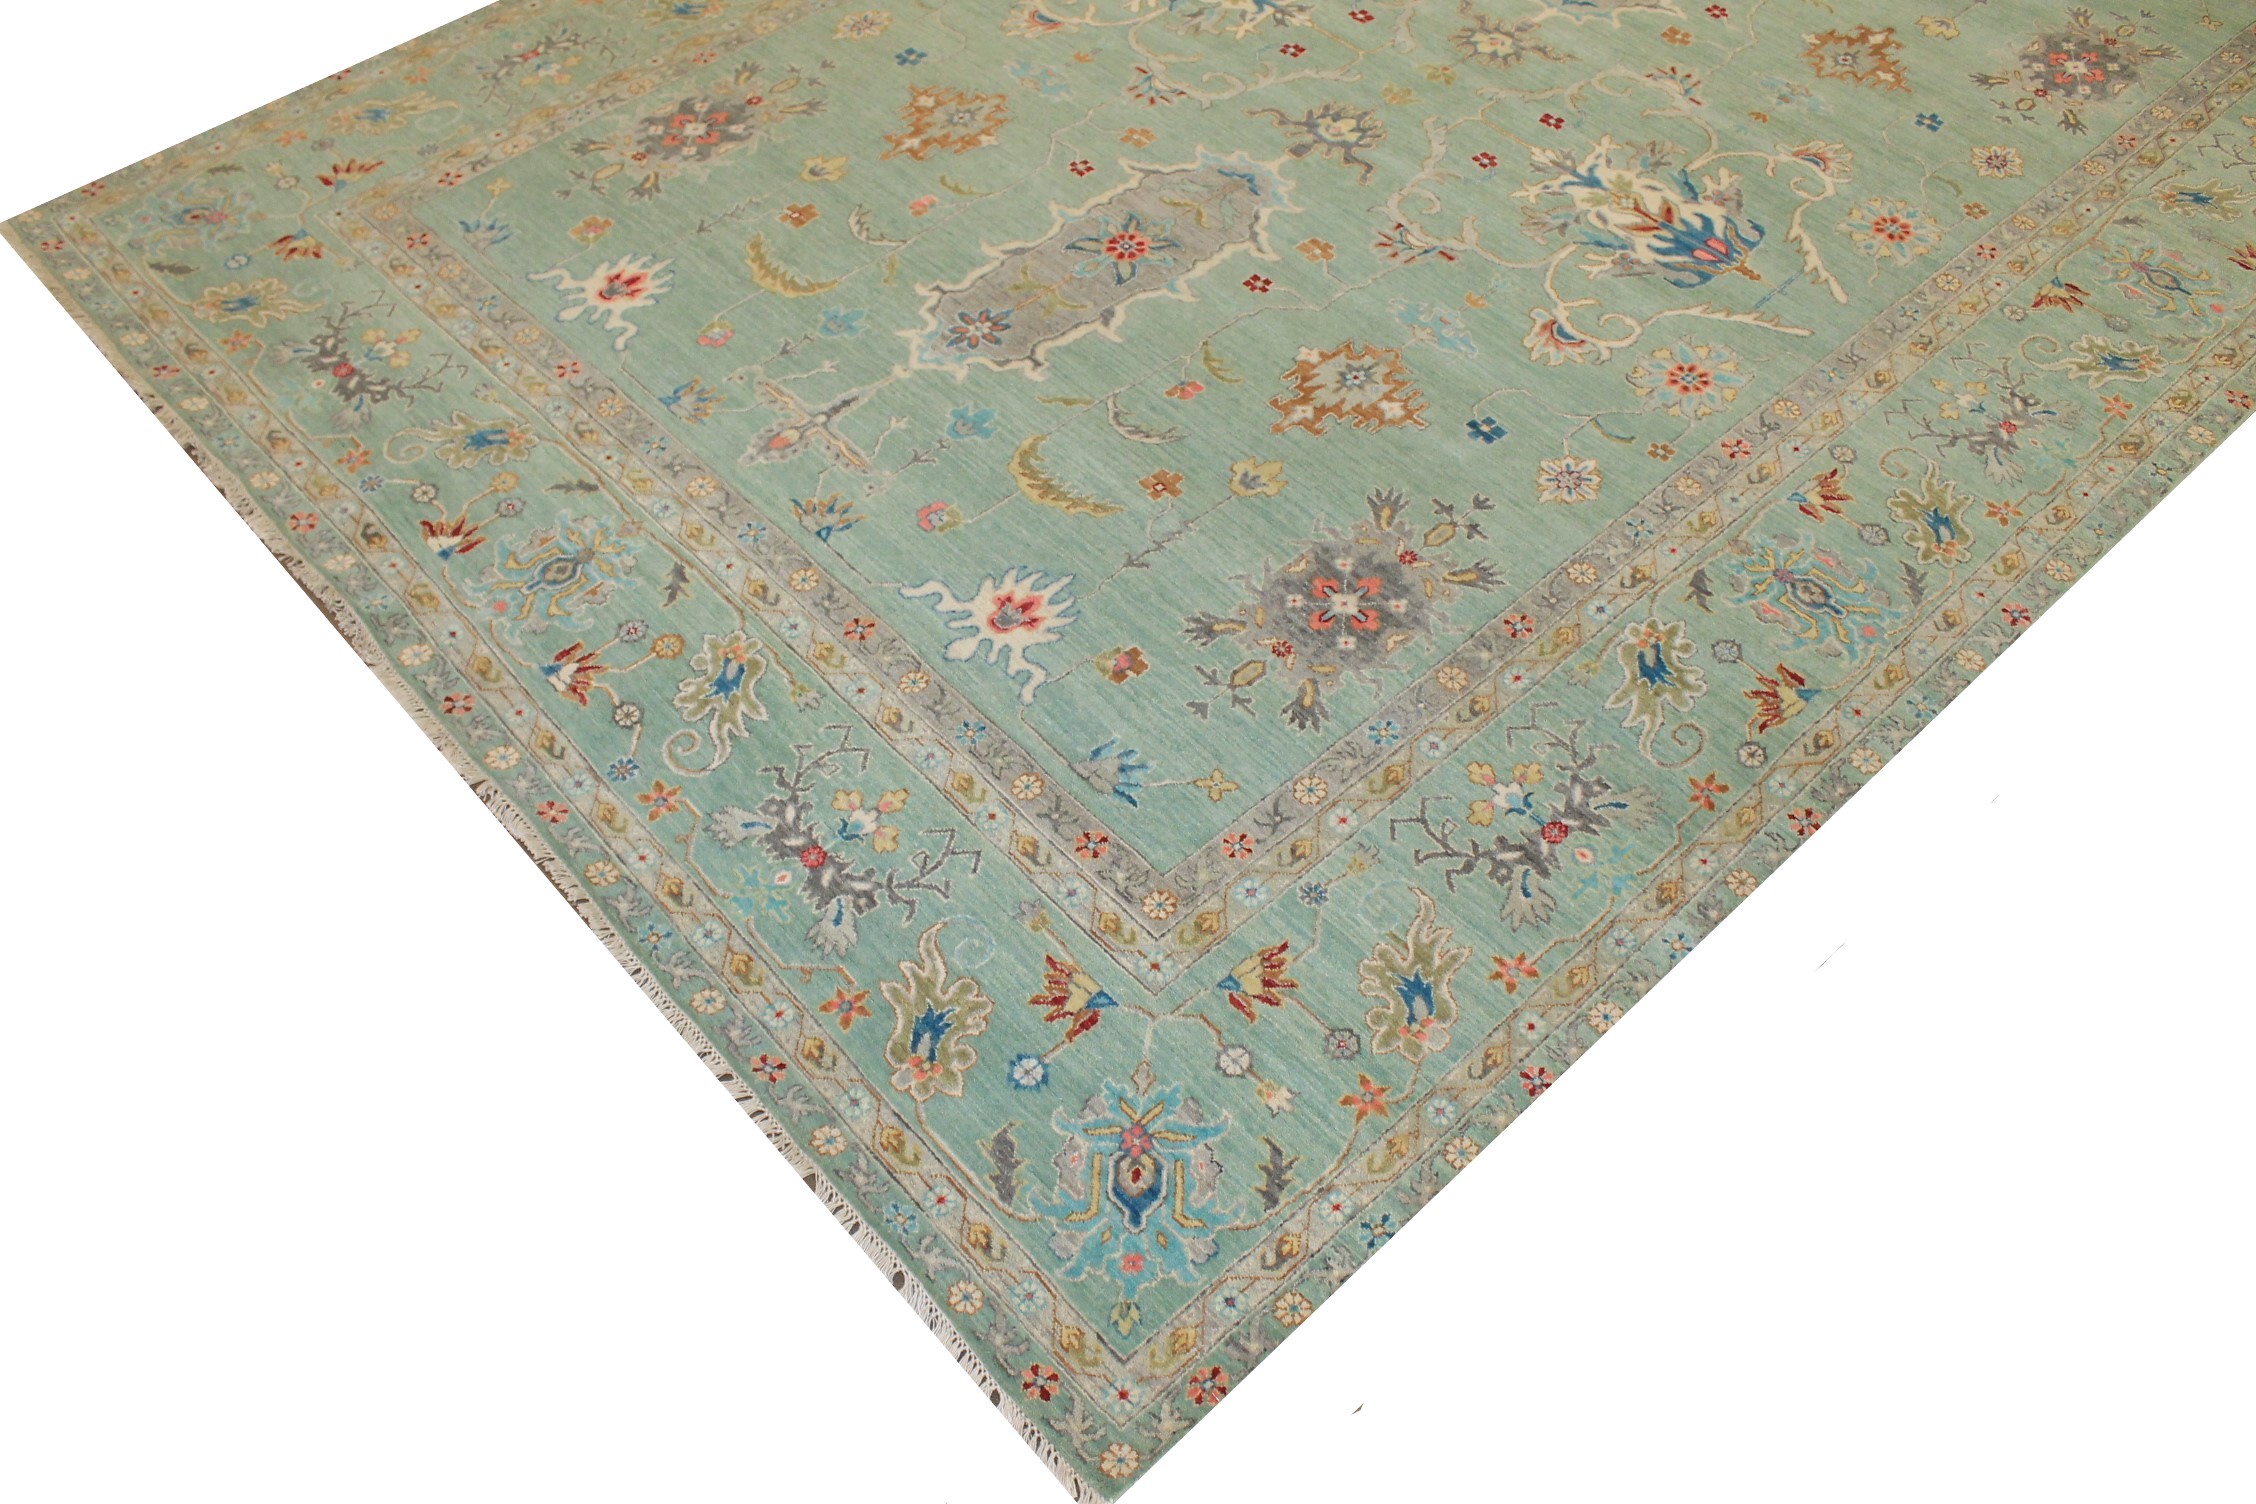 9x12 Traditional Hand Knotted Wool Area Rug - MR025186